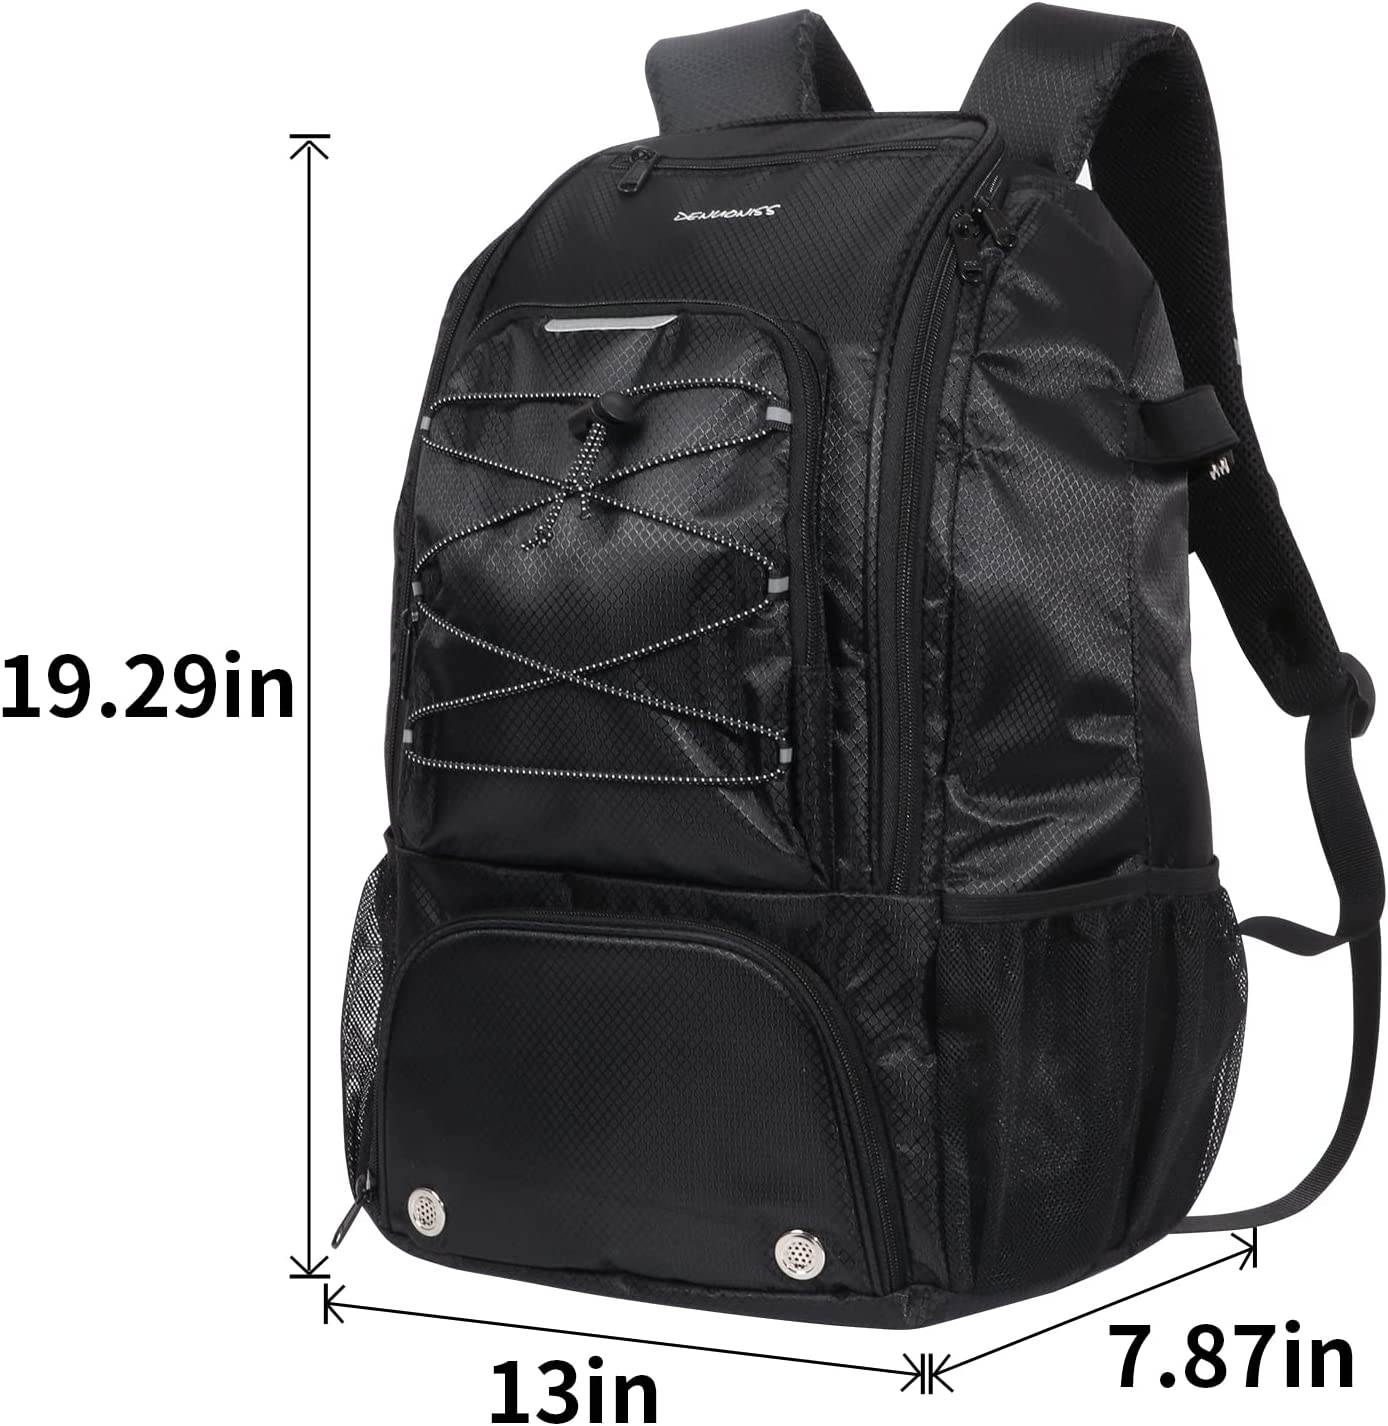 DENUONISS Baseball & Softball Bag, Backpack Bag for Youth, Boys and Adult with Fence Hook